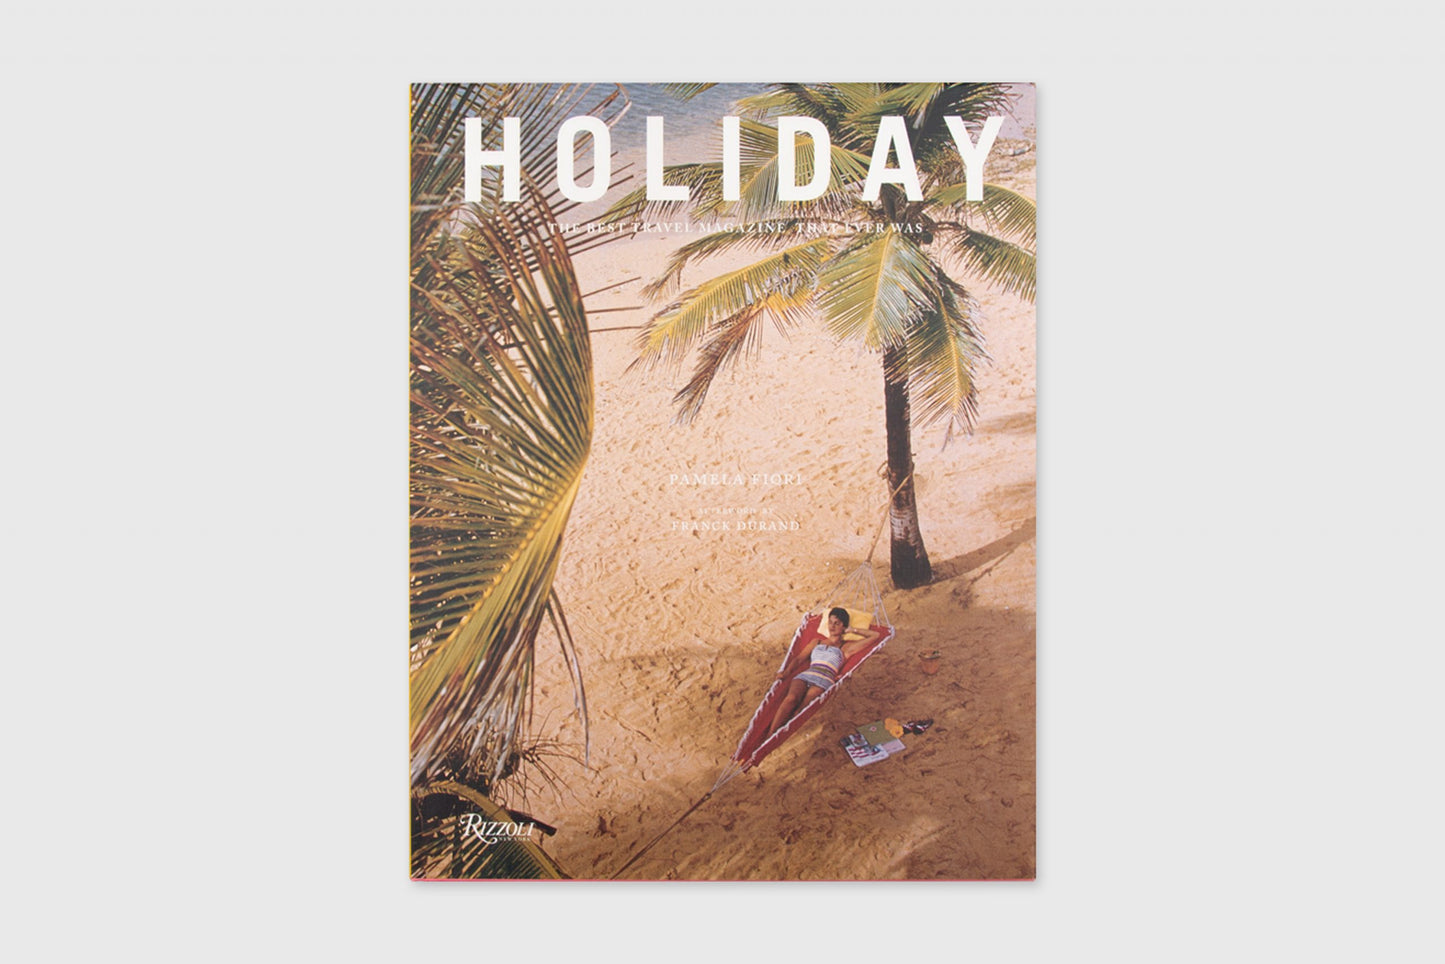 Holiday: The Best Travel Magazine that Ever